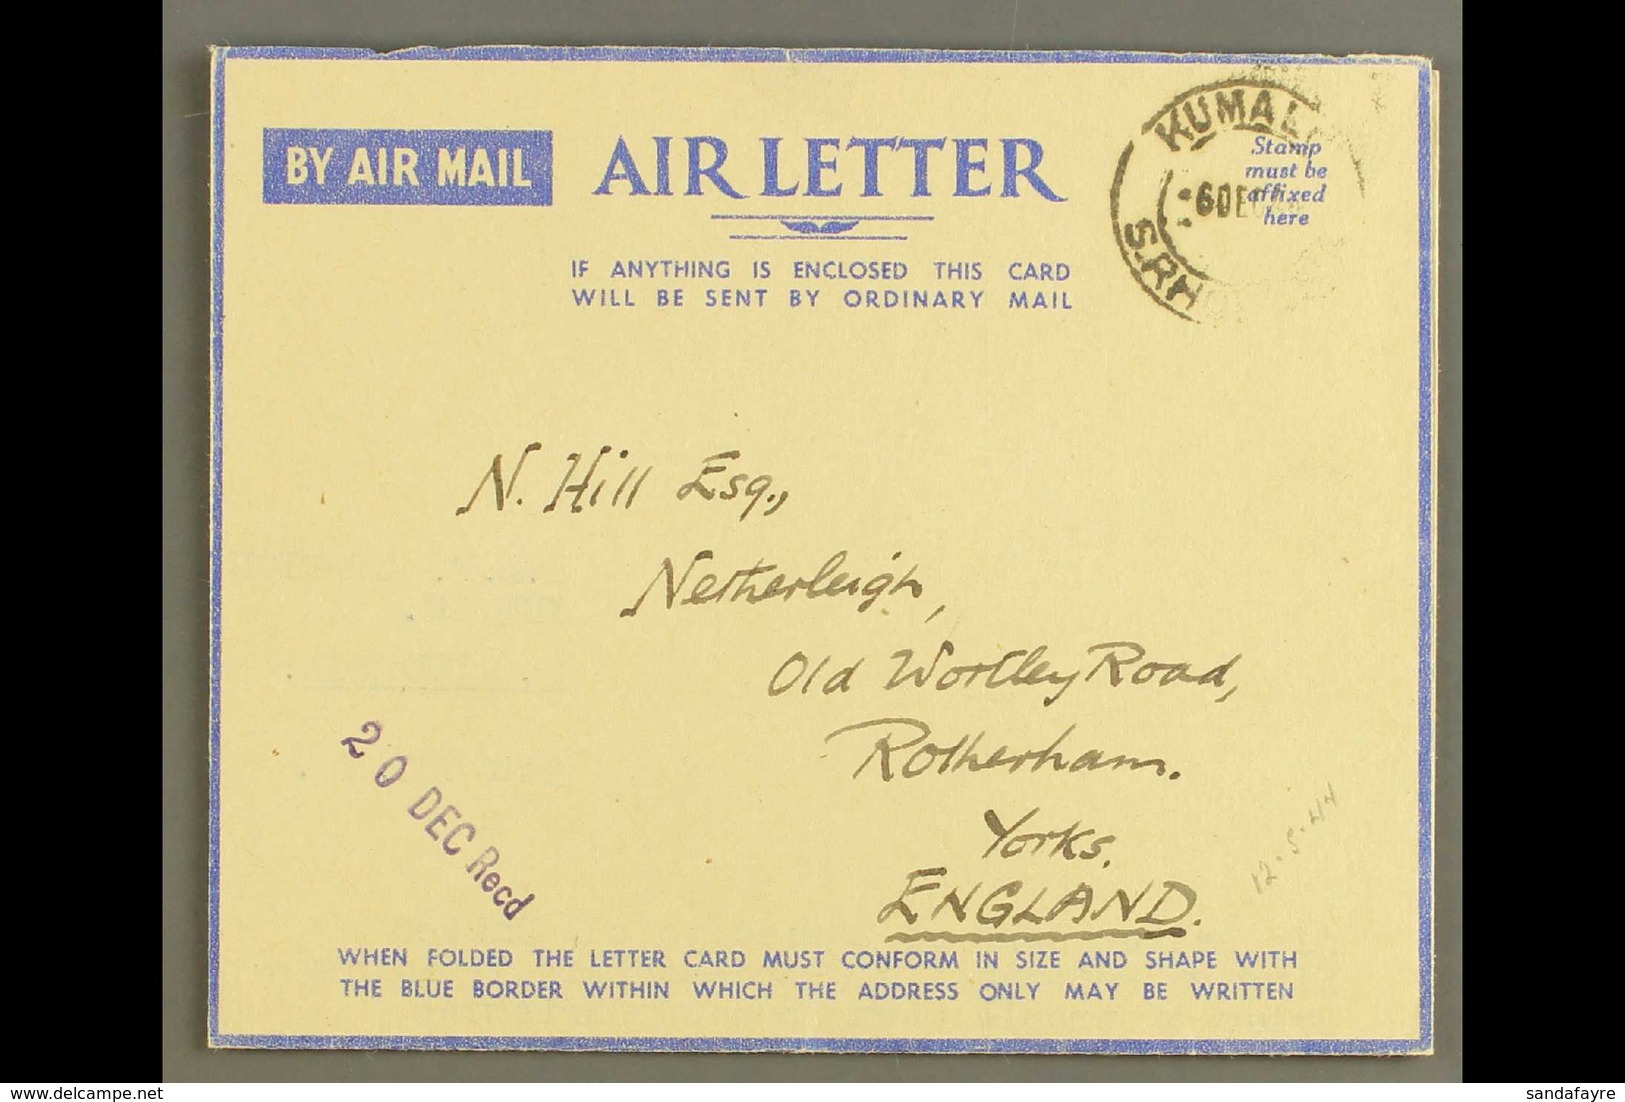 MILITARY AEROGRAMME 1944 (6 Dec) Stampless Air Letter For Christmas Post Concession Primarily For RAF Personnel, Cancell - Rhodésie Du Sud (...-1964)